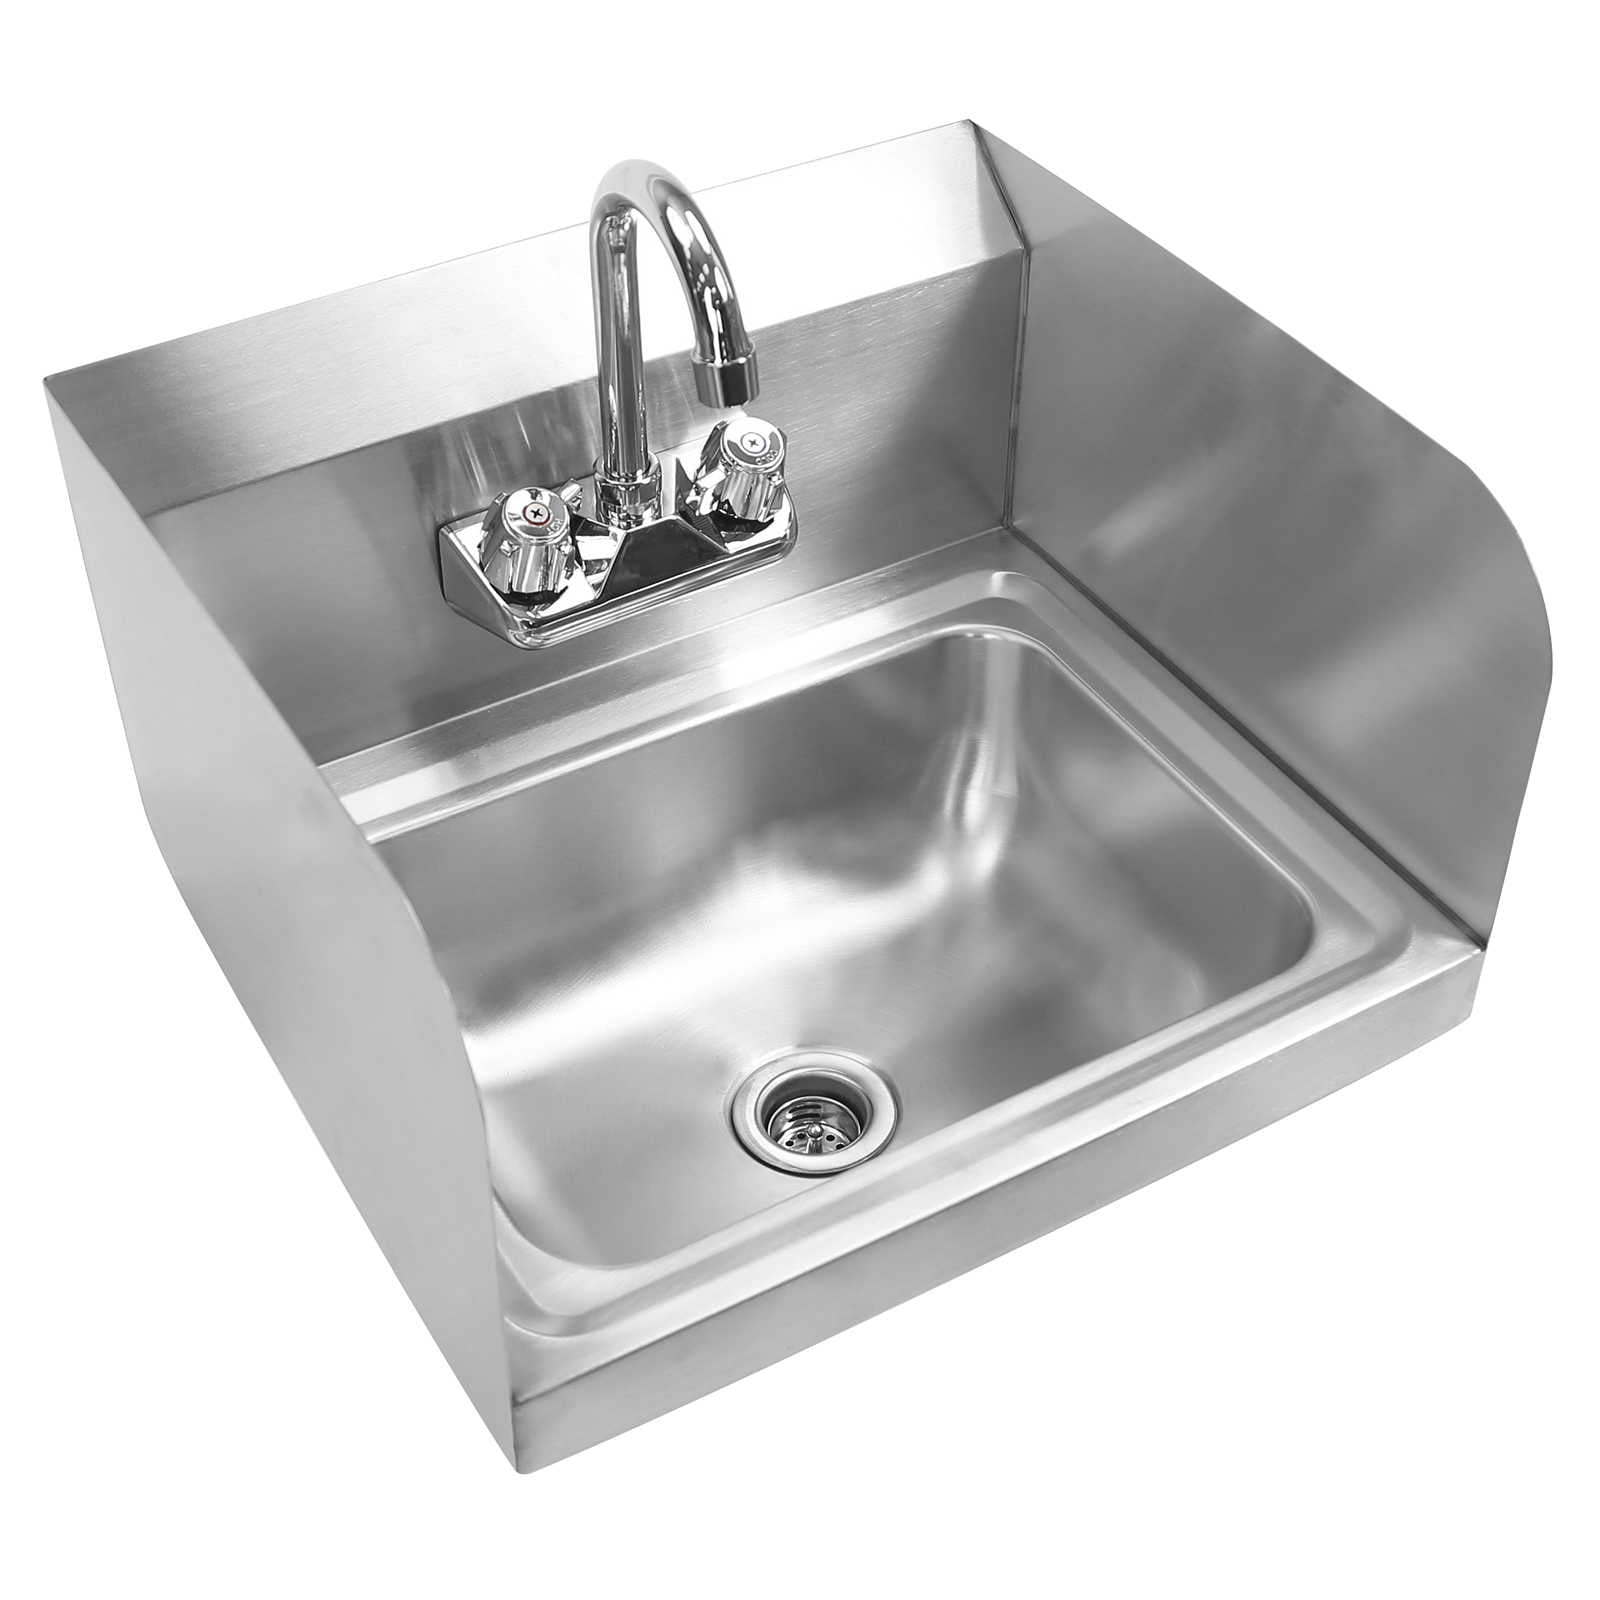 Gridmann Commercial Nsf Stainless Steel Sink With Faucet Sidesplashes Wall Mount Hand Washing Basin